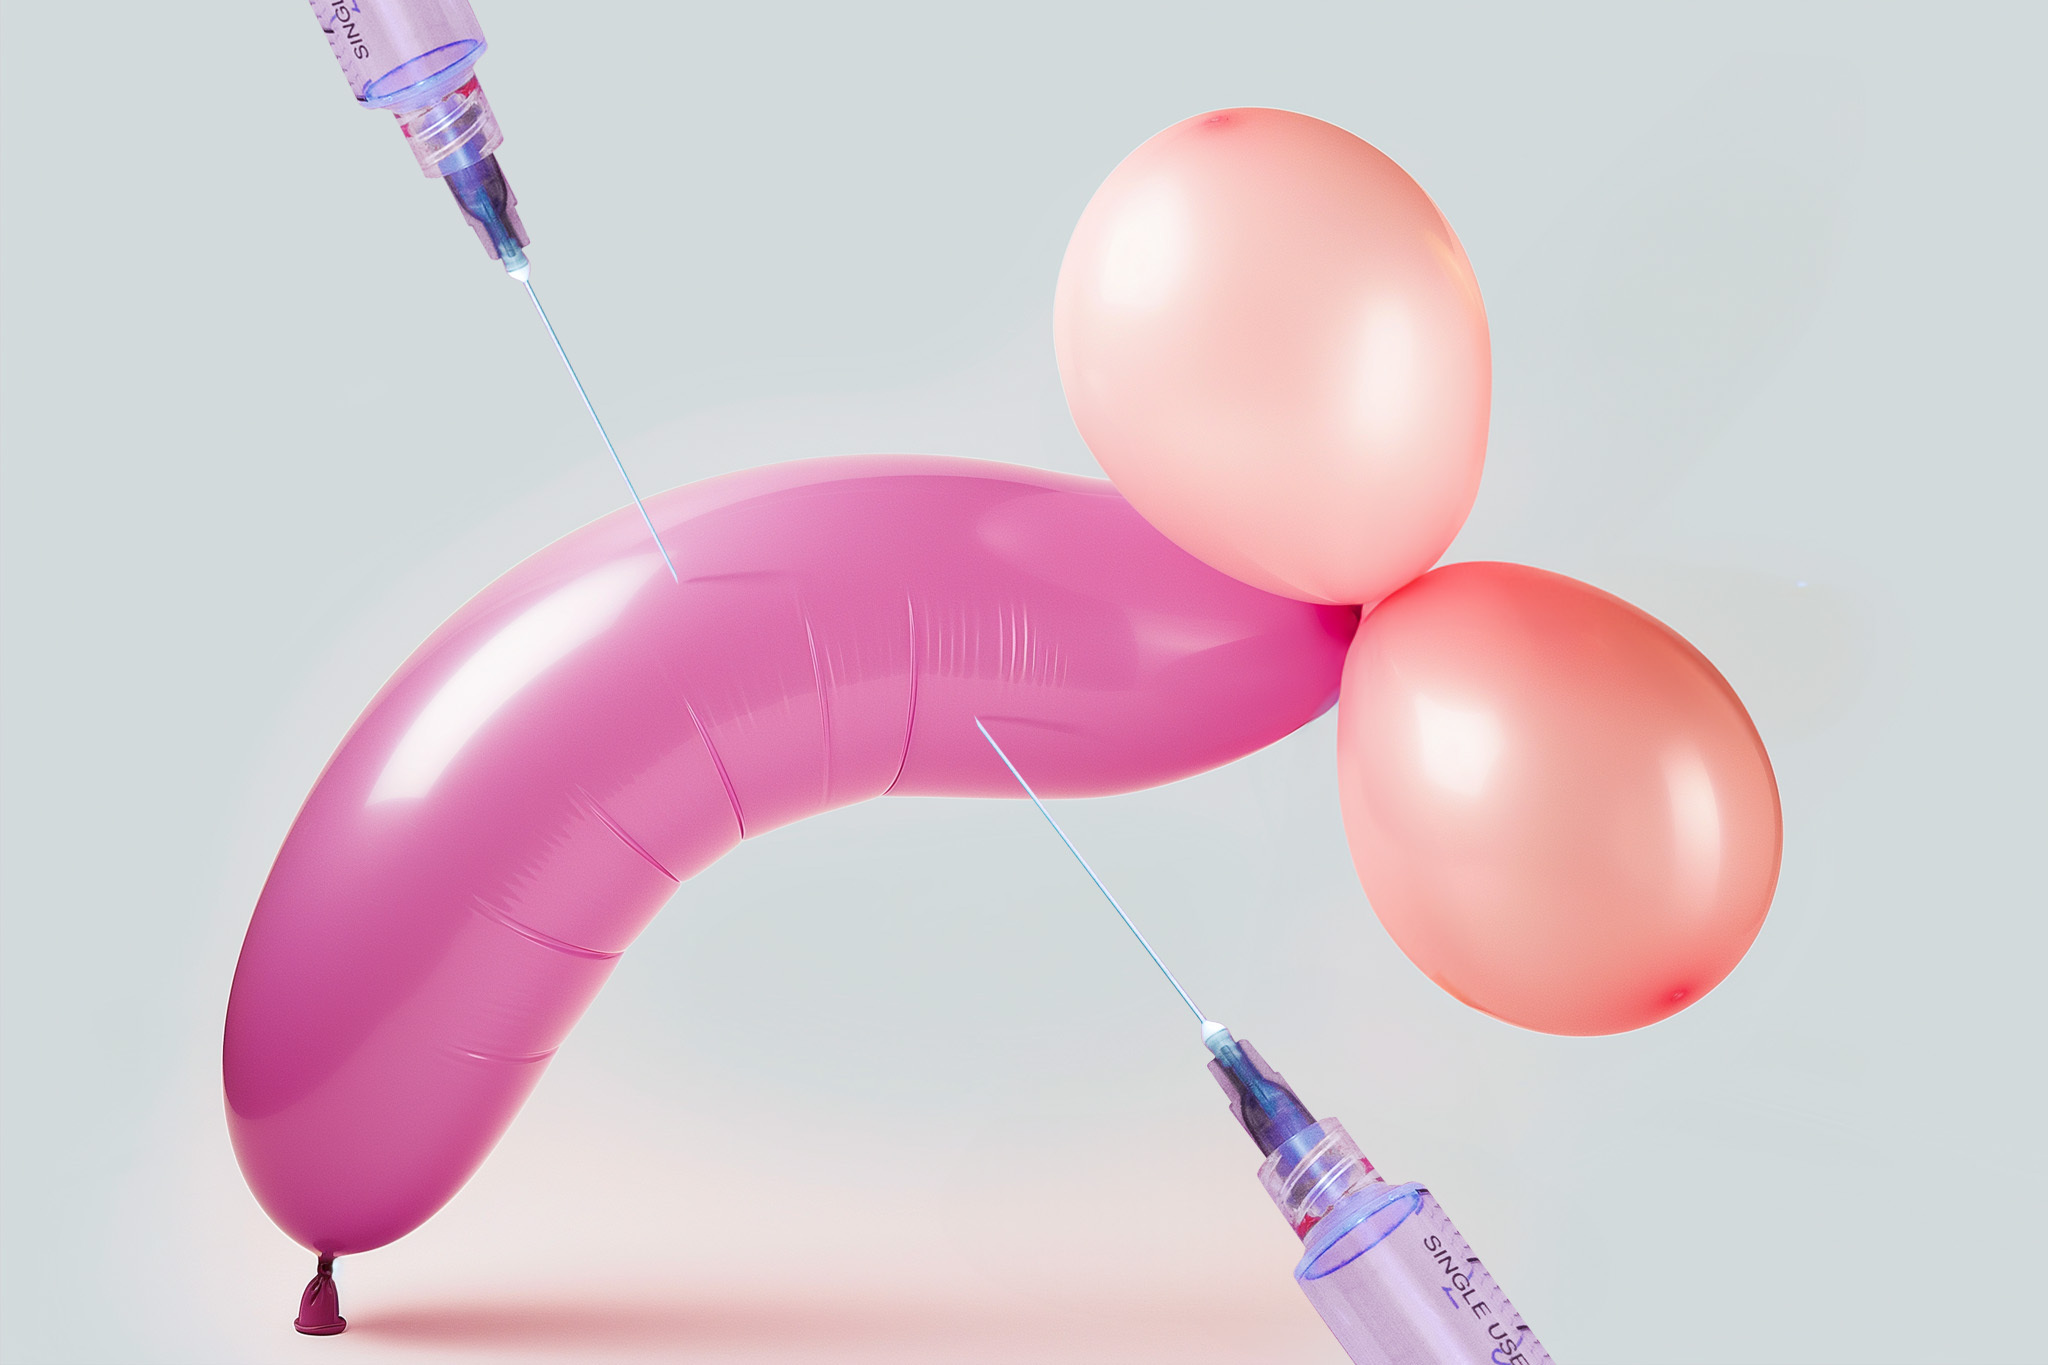 Balloon art of male genitals injected with Botox